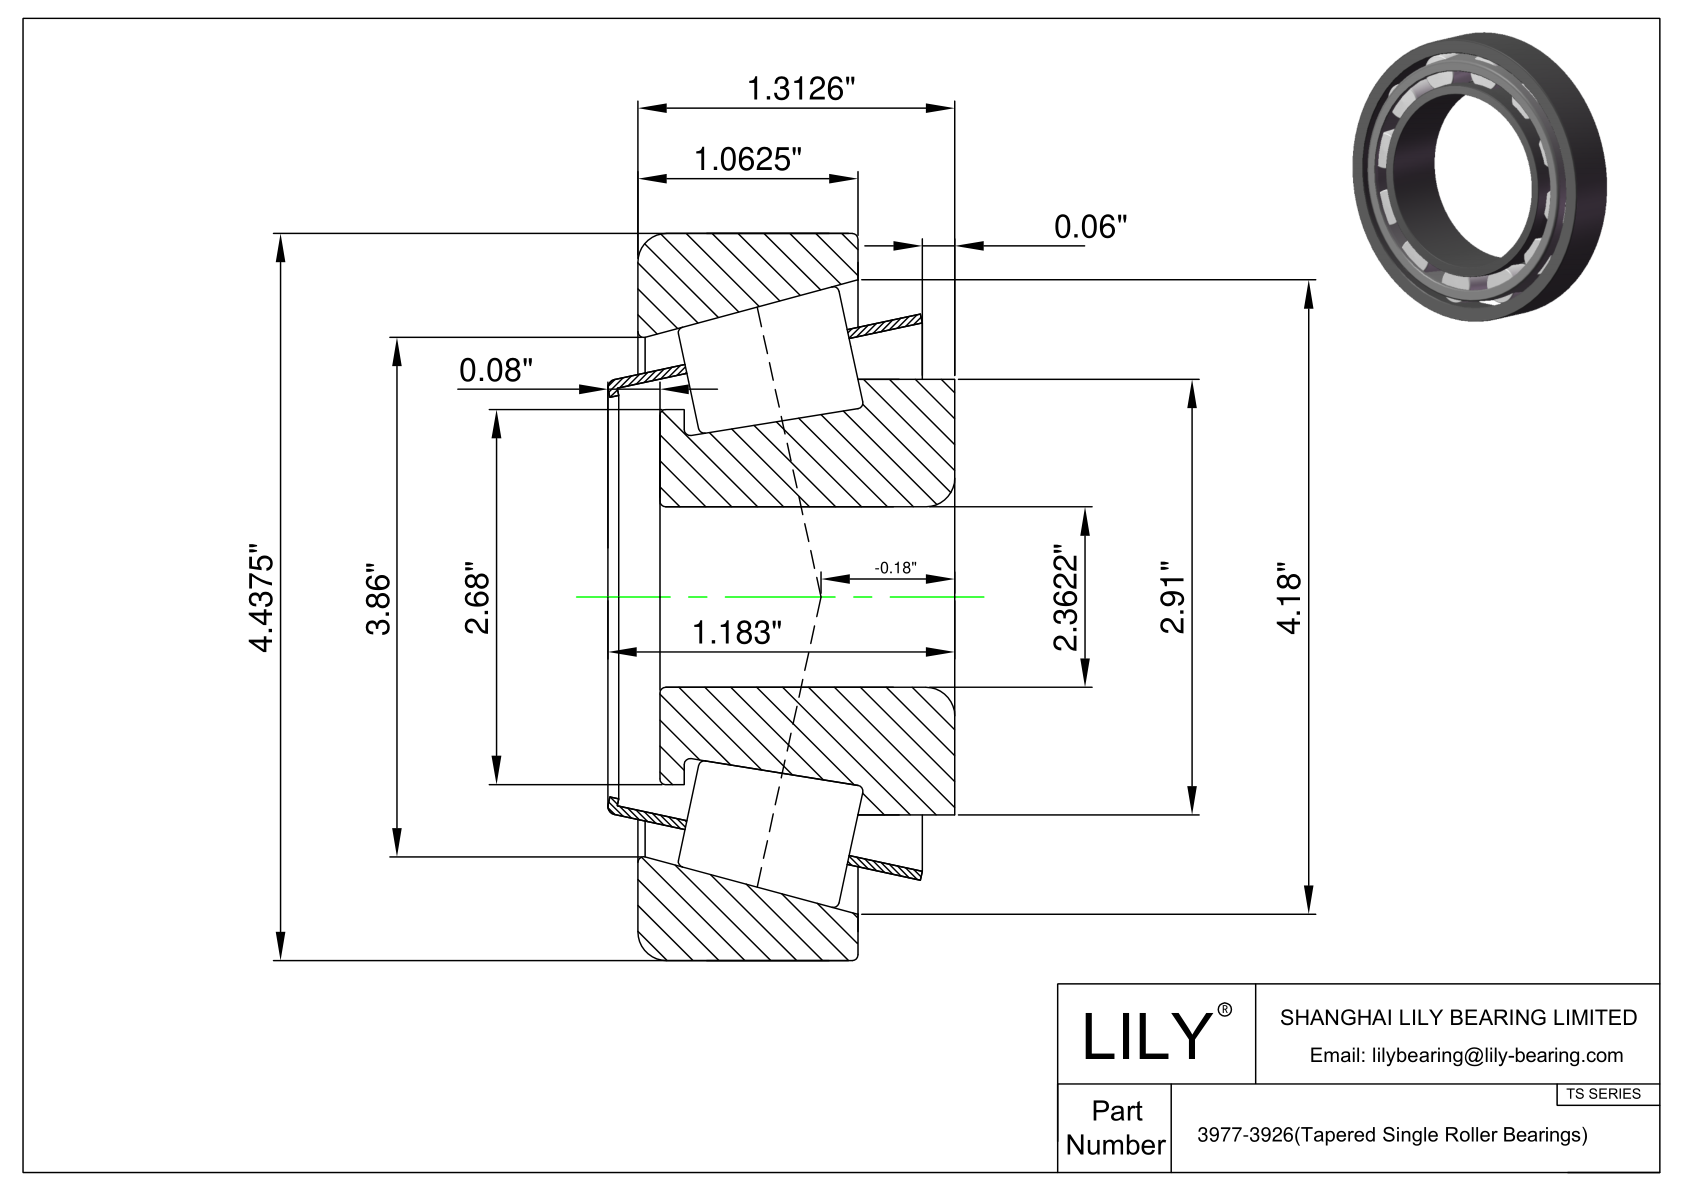 3977-3926 TS (Tapered Single Roller Bearings) (Imperial) cad drawing